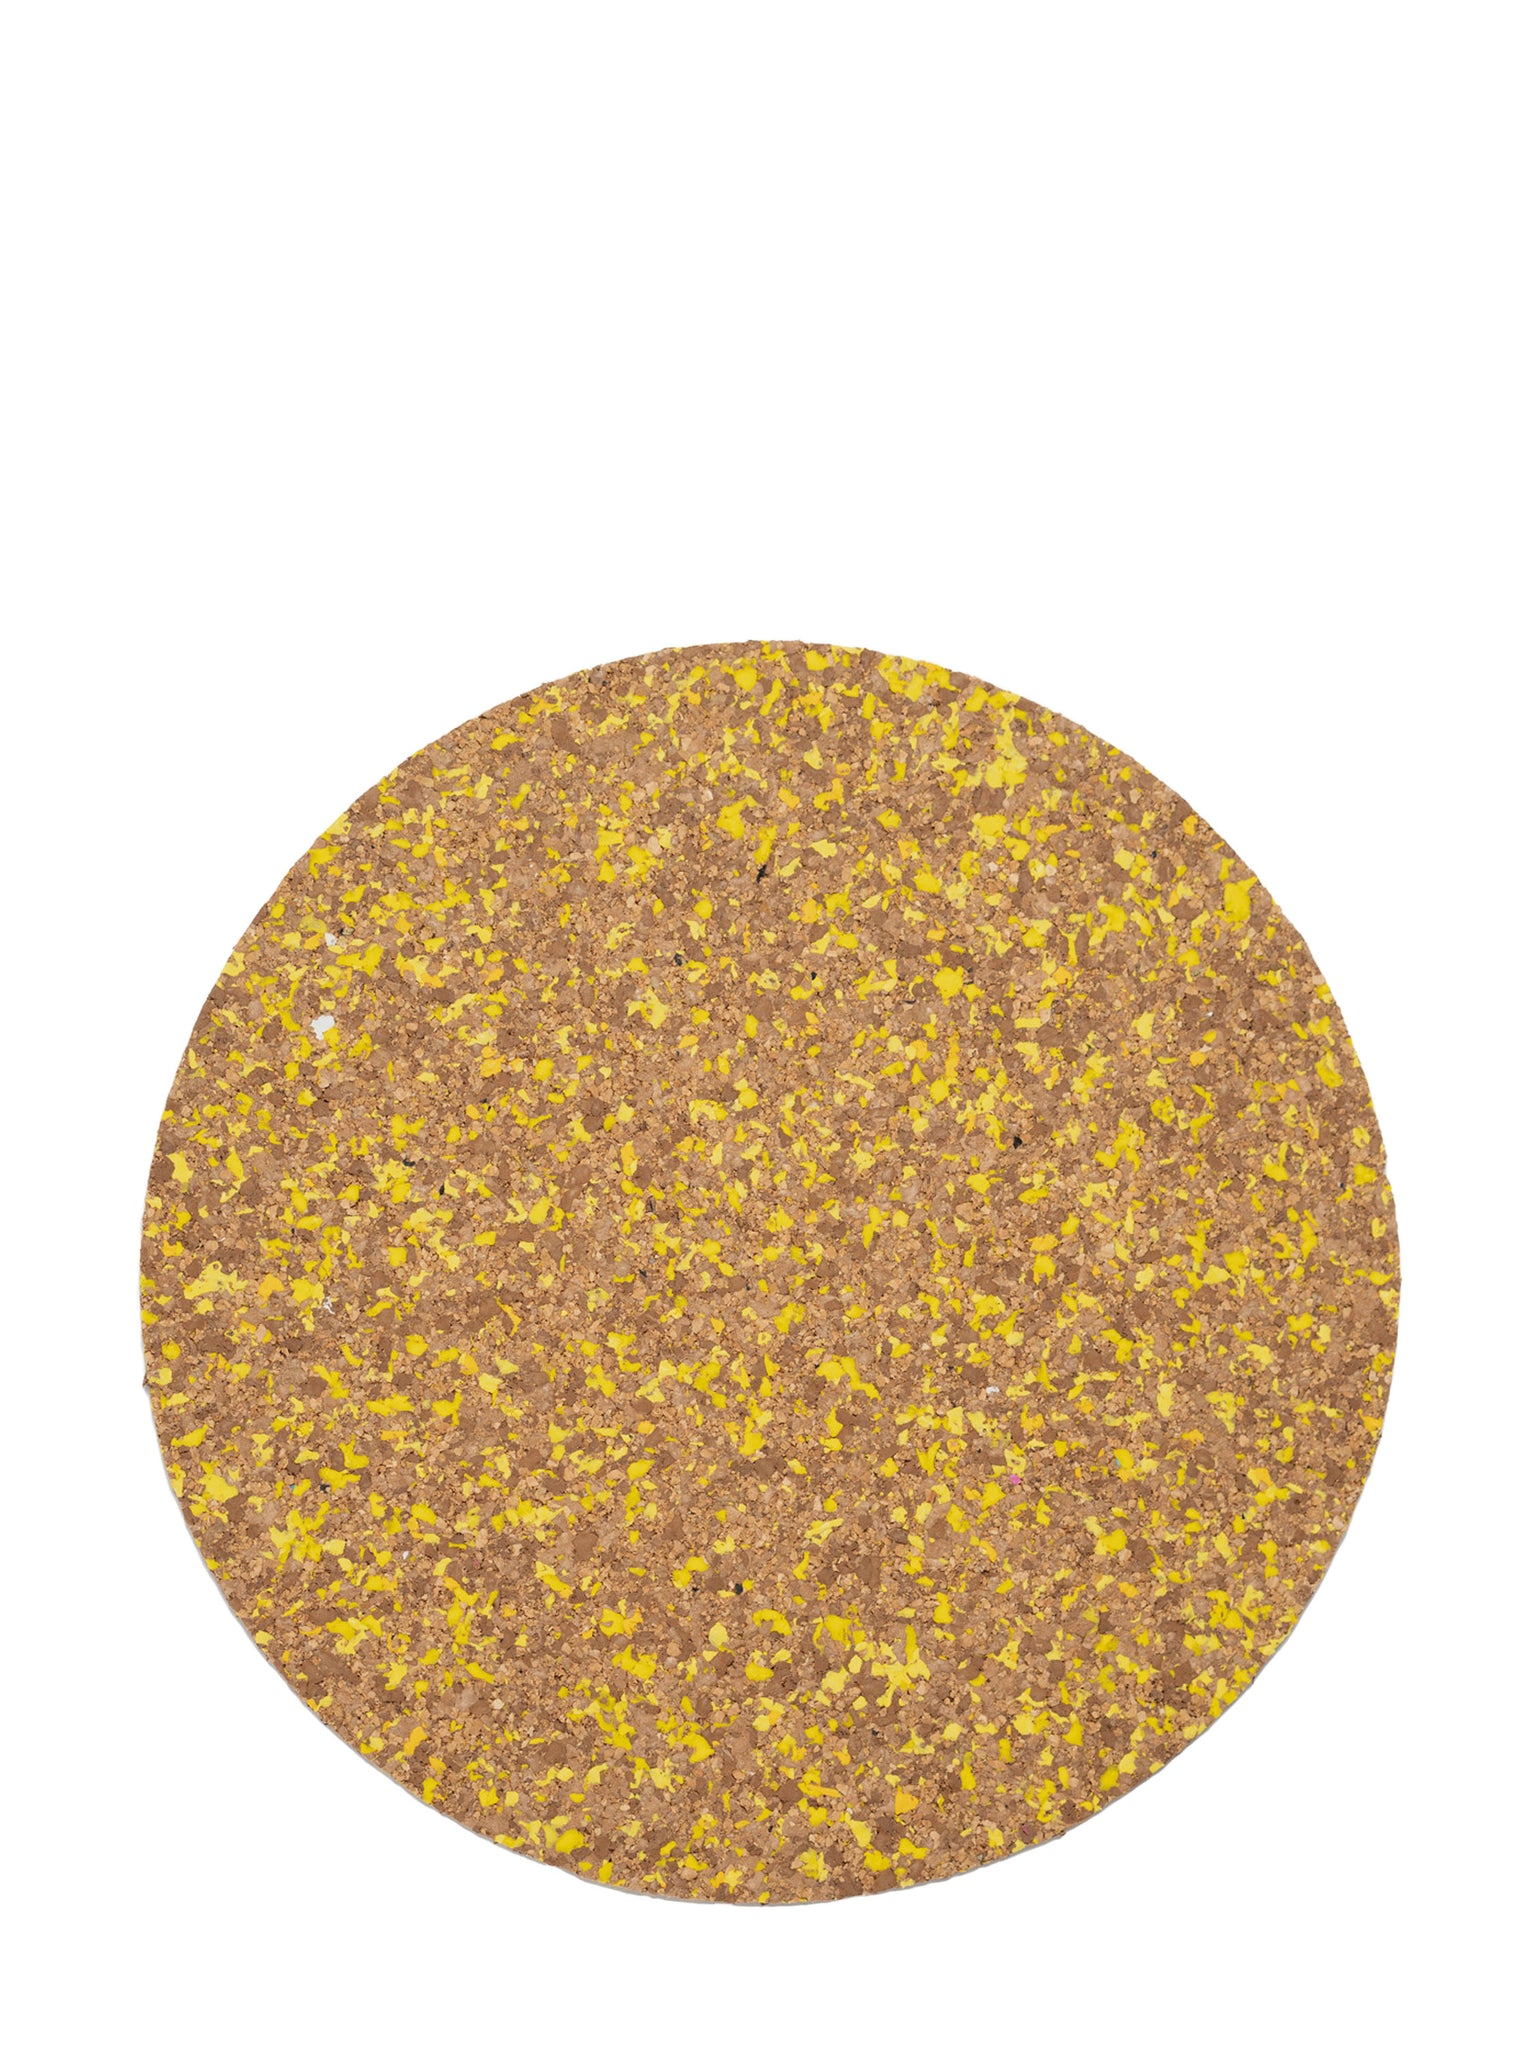 eco recycled Yellow round cork placemat by Yod and Co